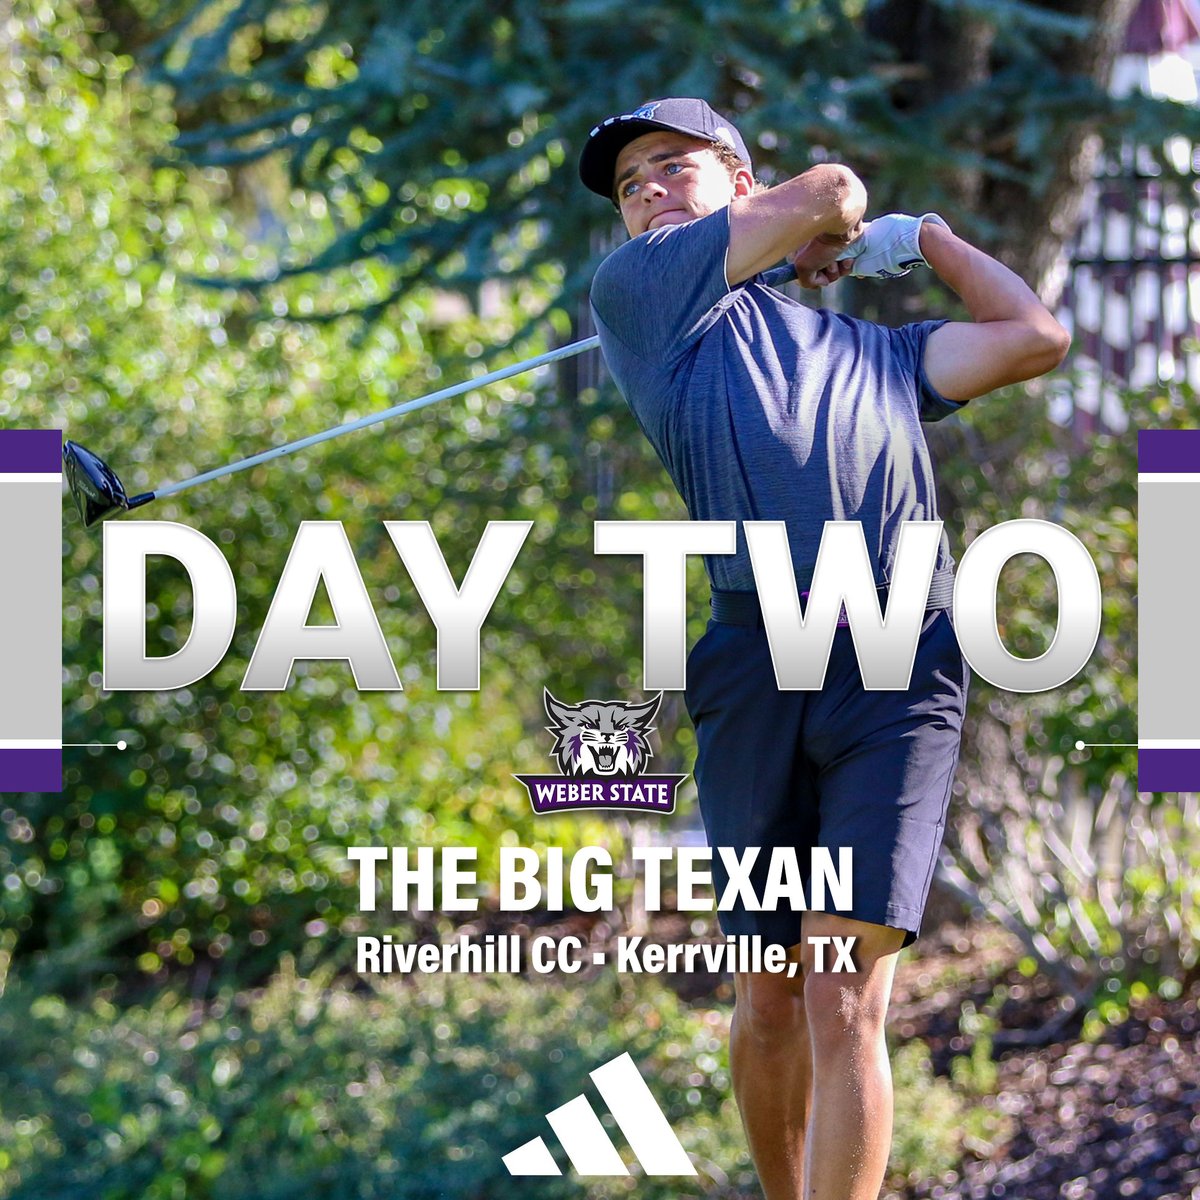 The Wildcats are heading to the tee for the final round of The Big Texan at Riverhill C.C. Weber State enters the day in 3rd place. Follow the action with live scoring at bit.ly/3vieofX Let's Go Wildcats!